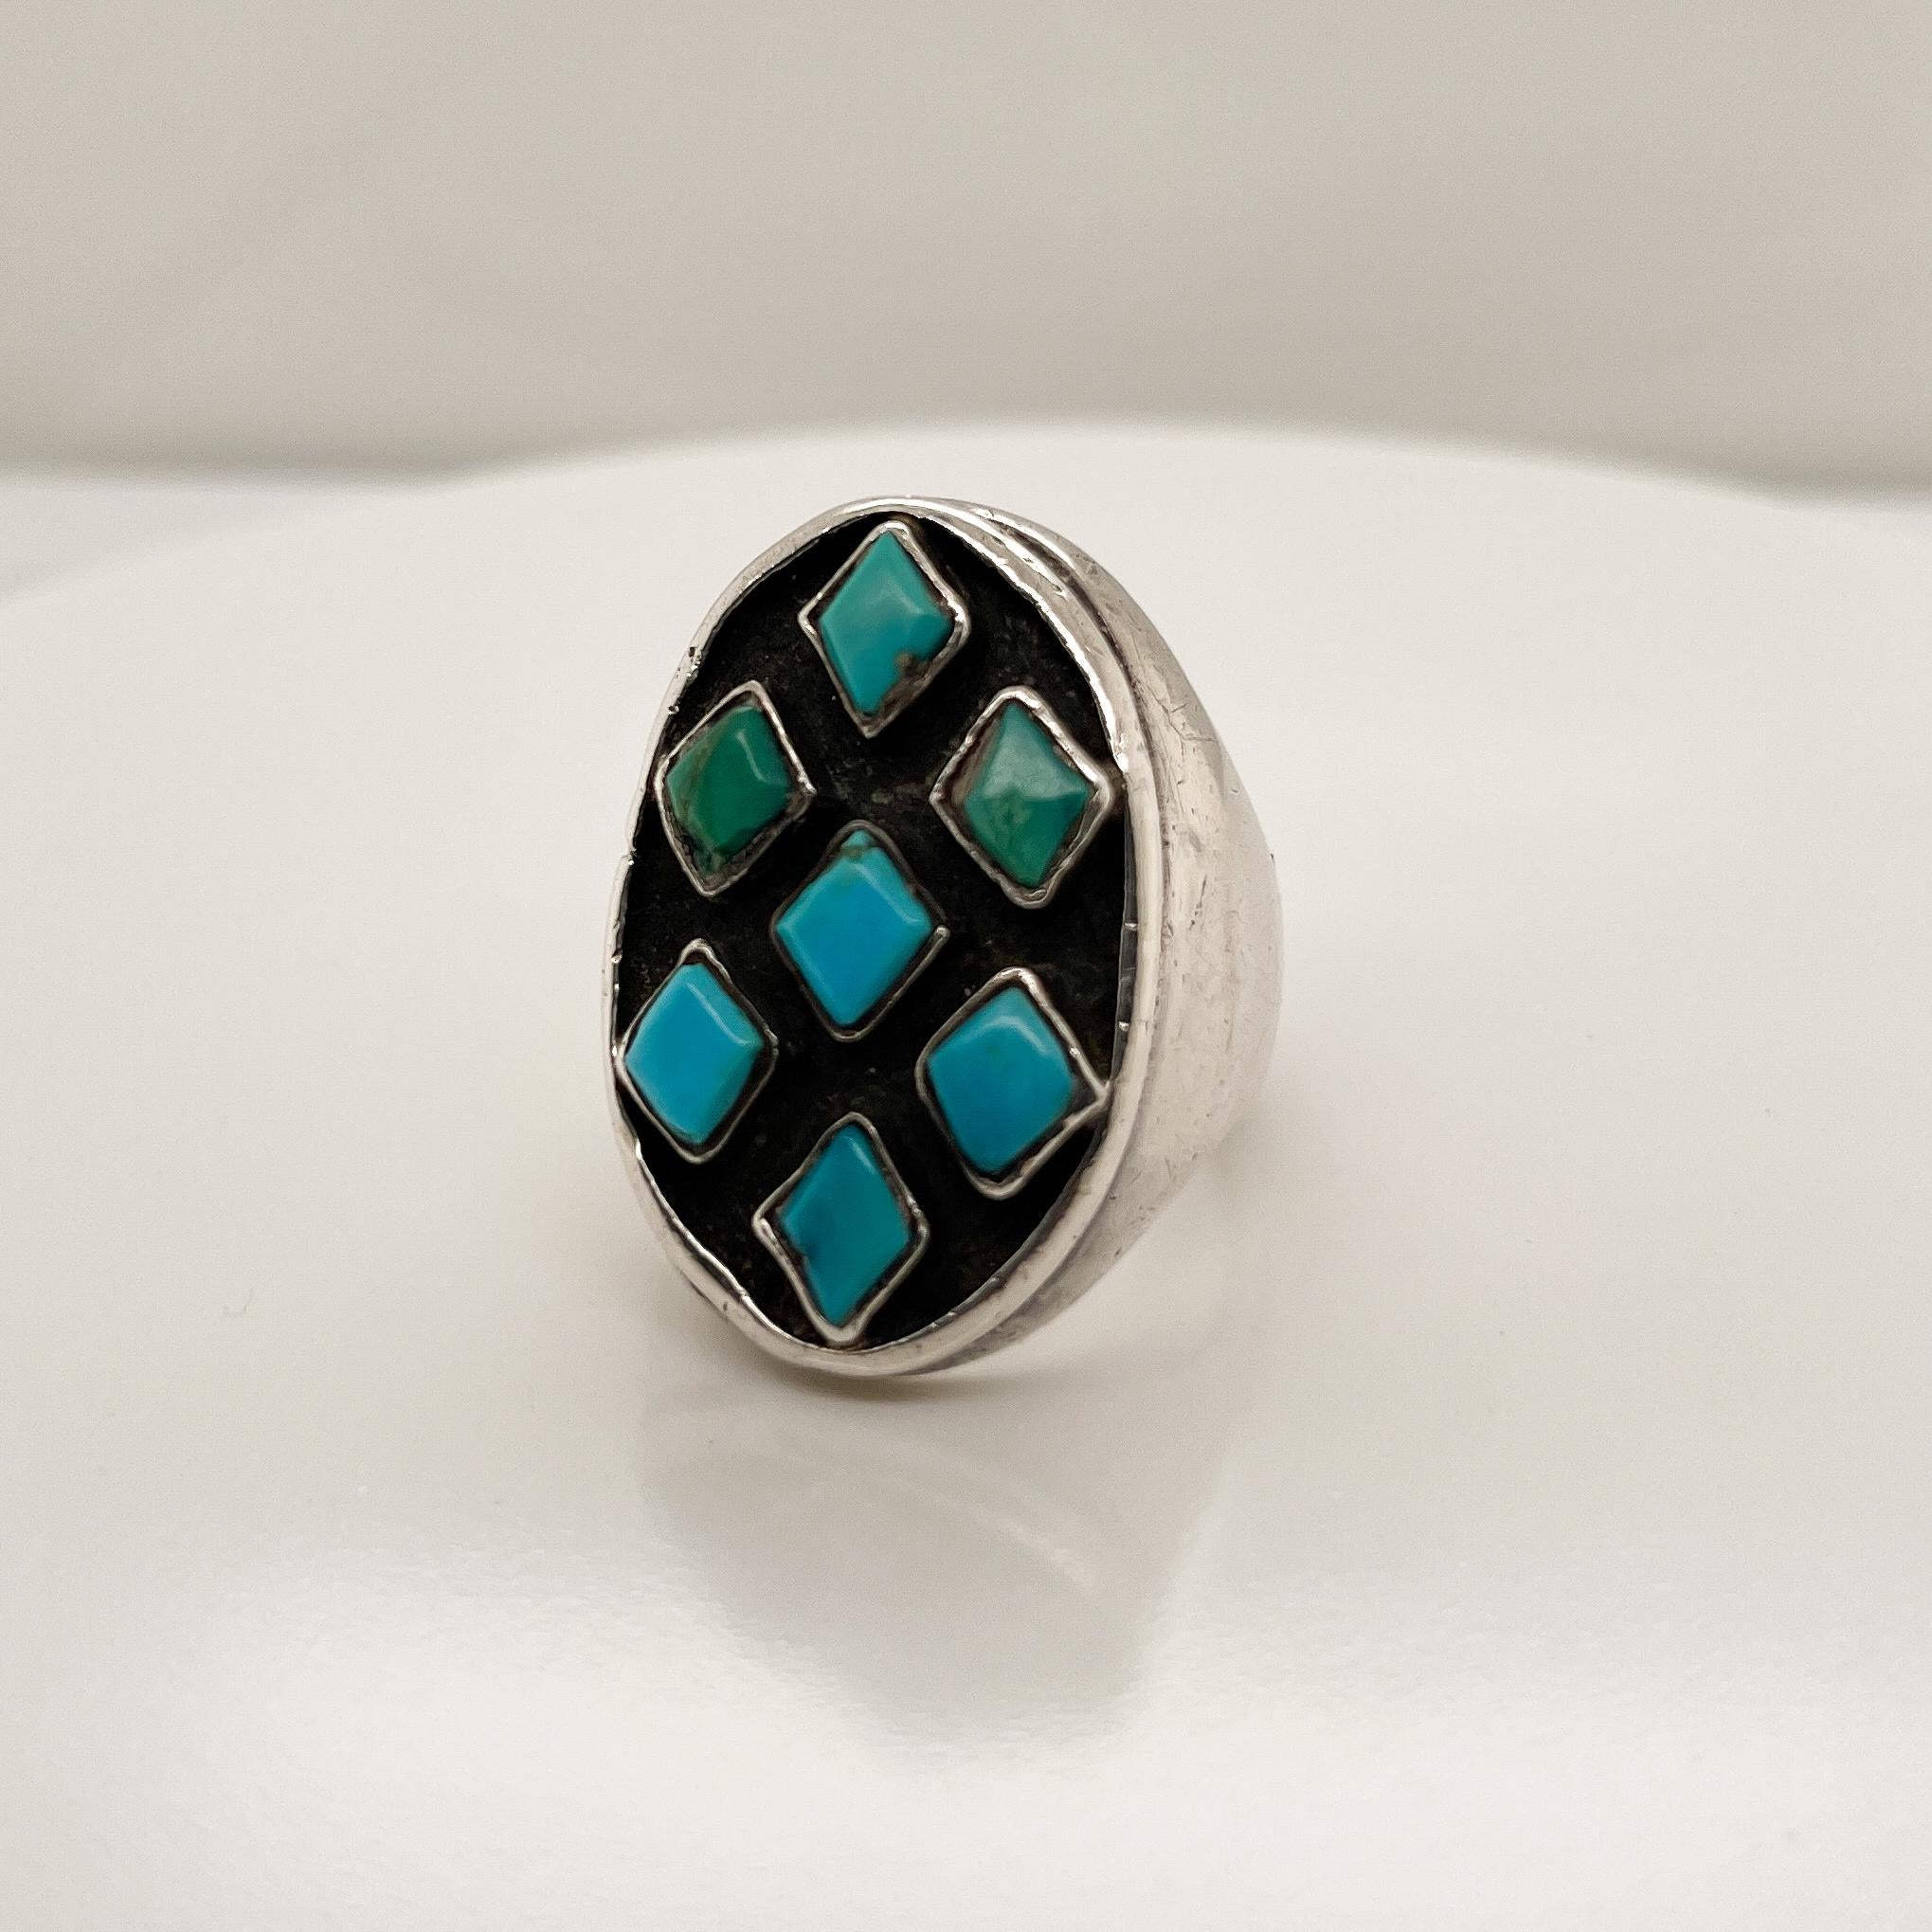 A fine vintage Navajo ring.

Crafted in silver with 7 diamond-shaped bezel set turquoise cabochons that are arranged on a recessed liver sulfur patinated head.

A fine Old Pawn signet style ring!

Date:
20th Century

Overall Condition:
It is in